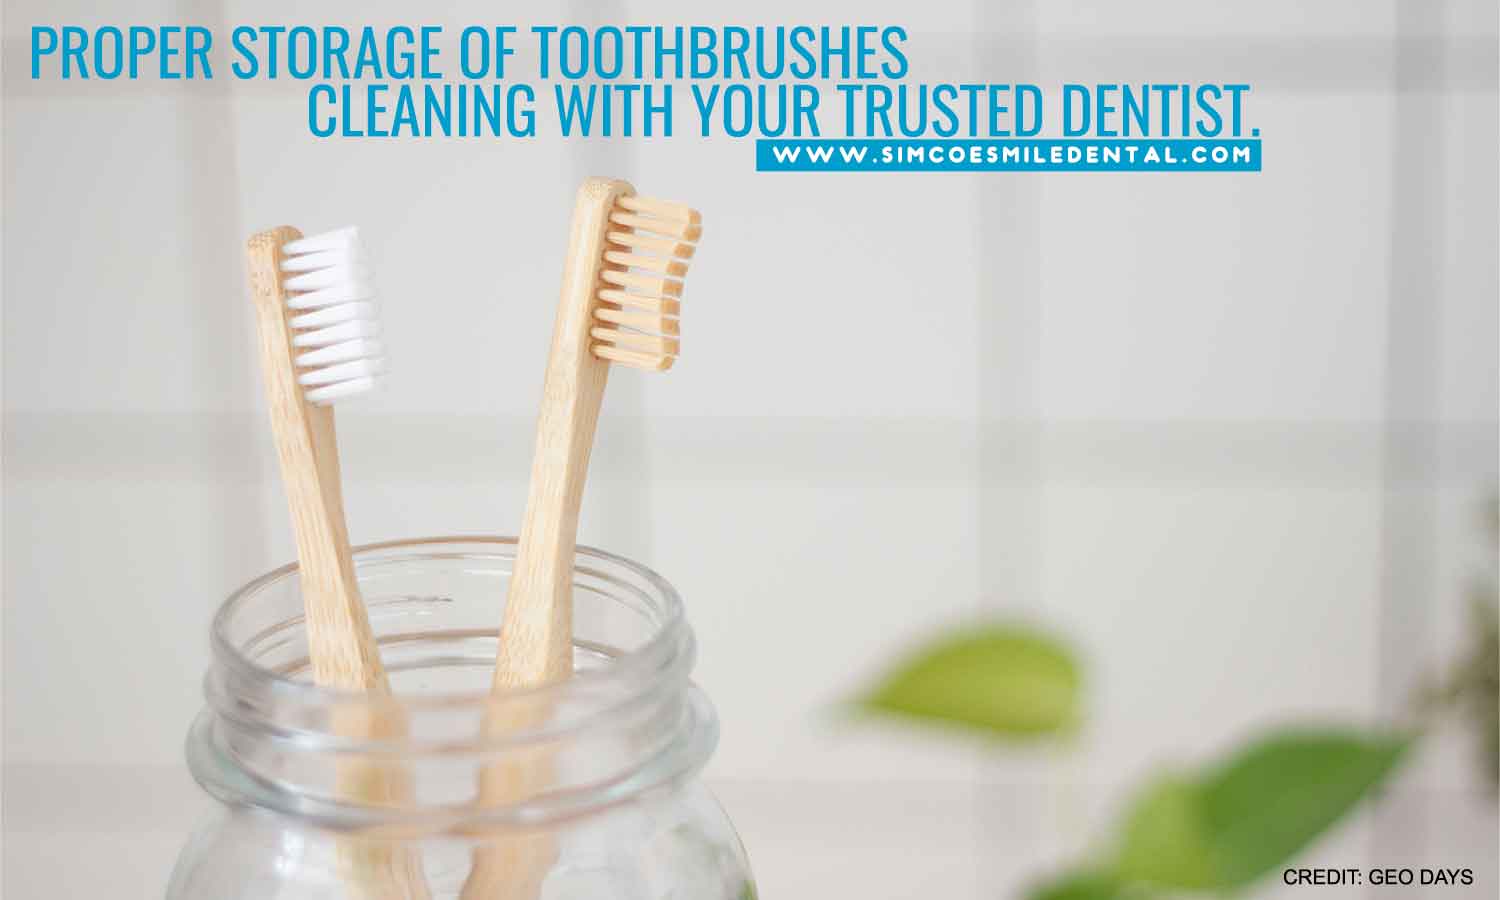 How to Help Your Toothbrush Take Care of Your Teeth